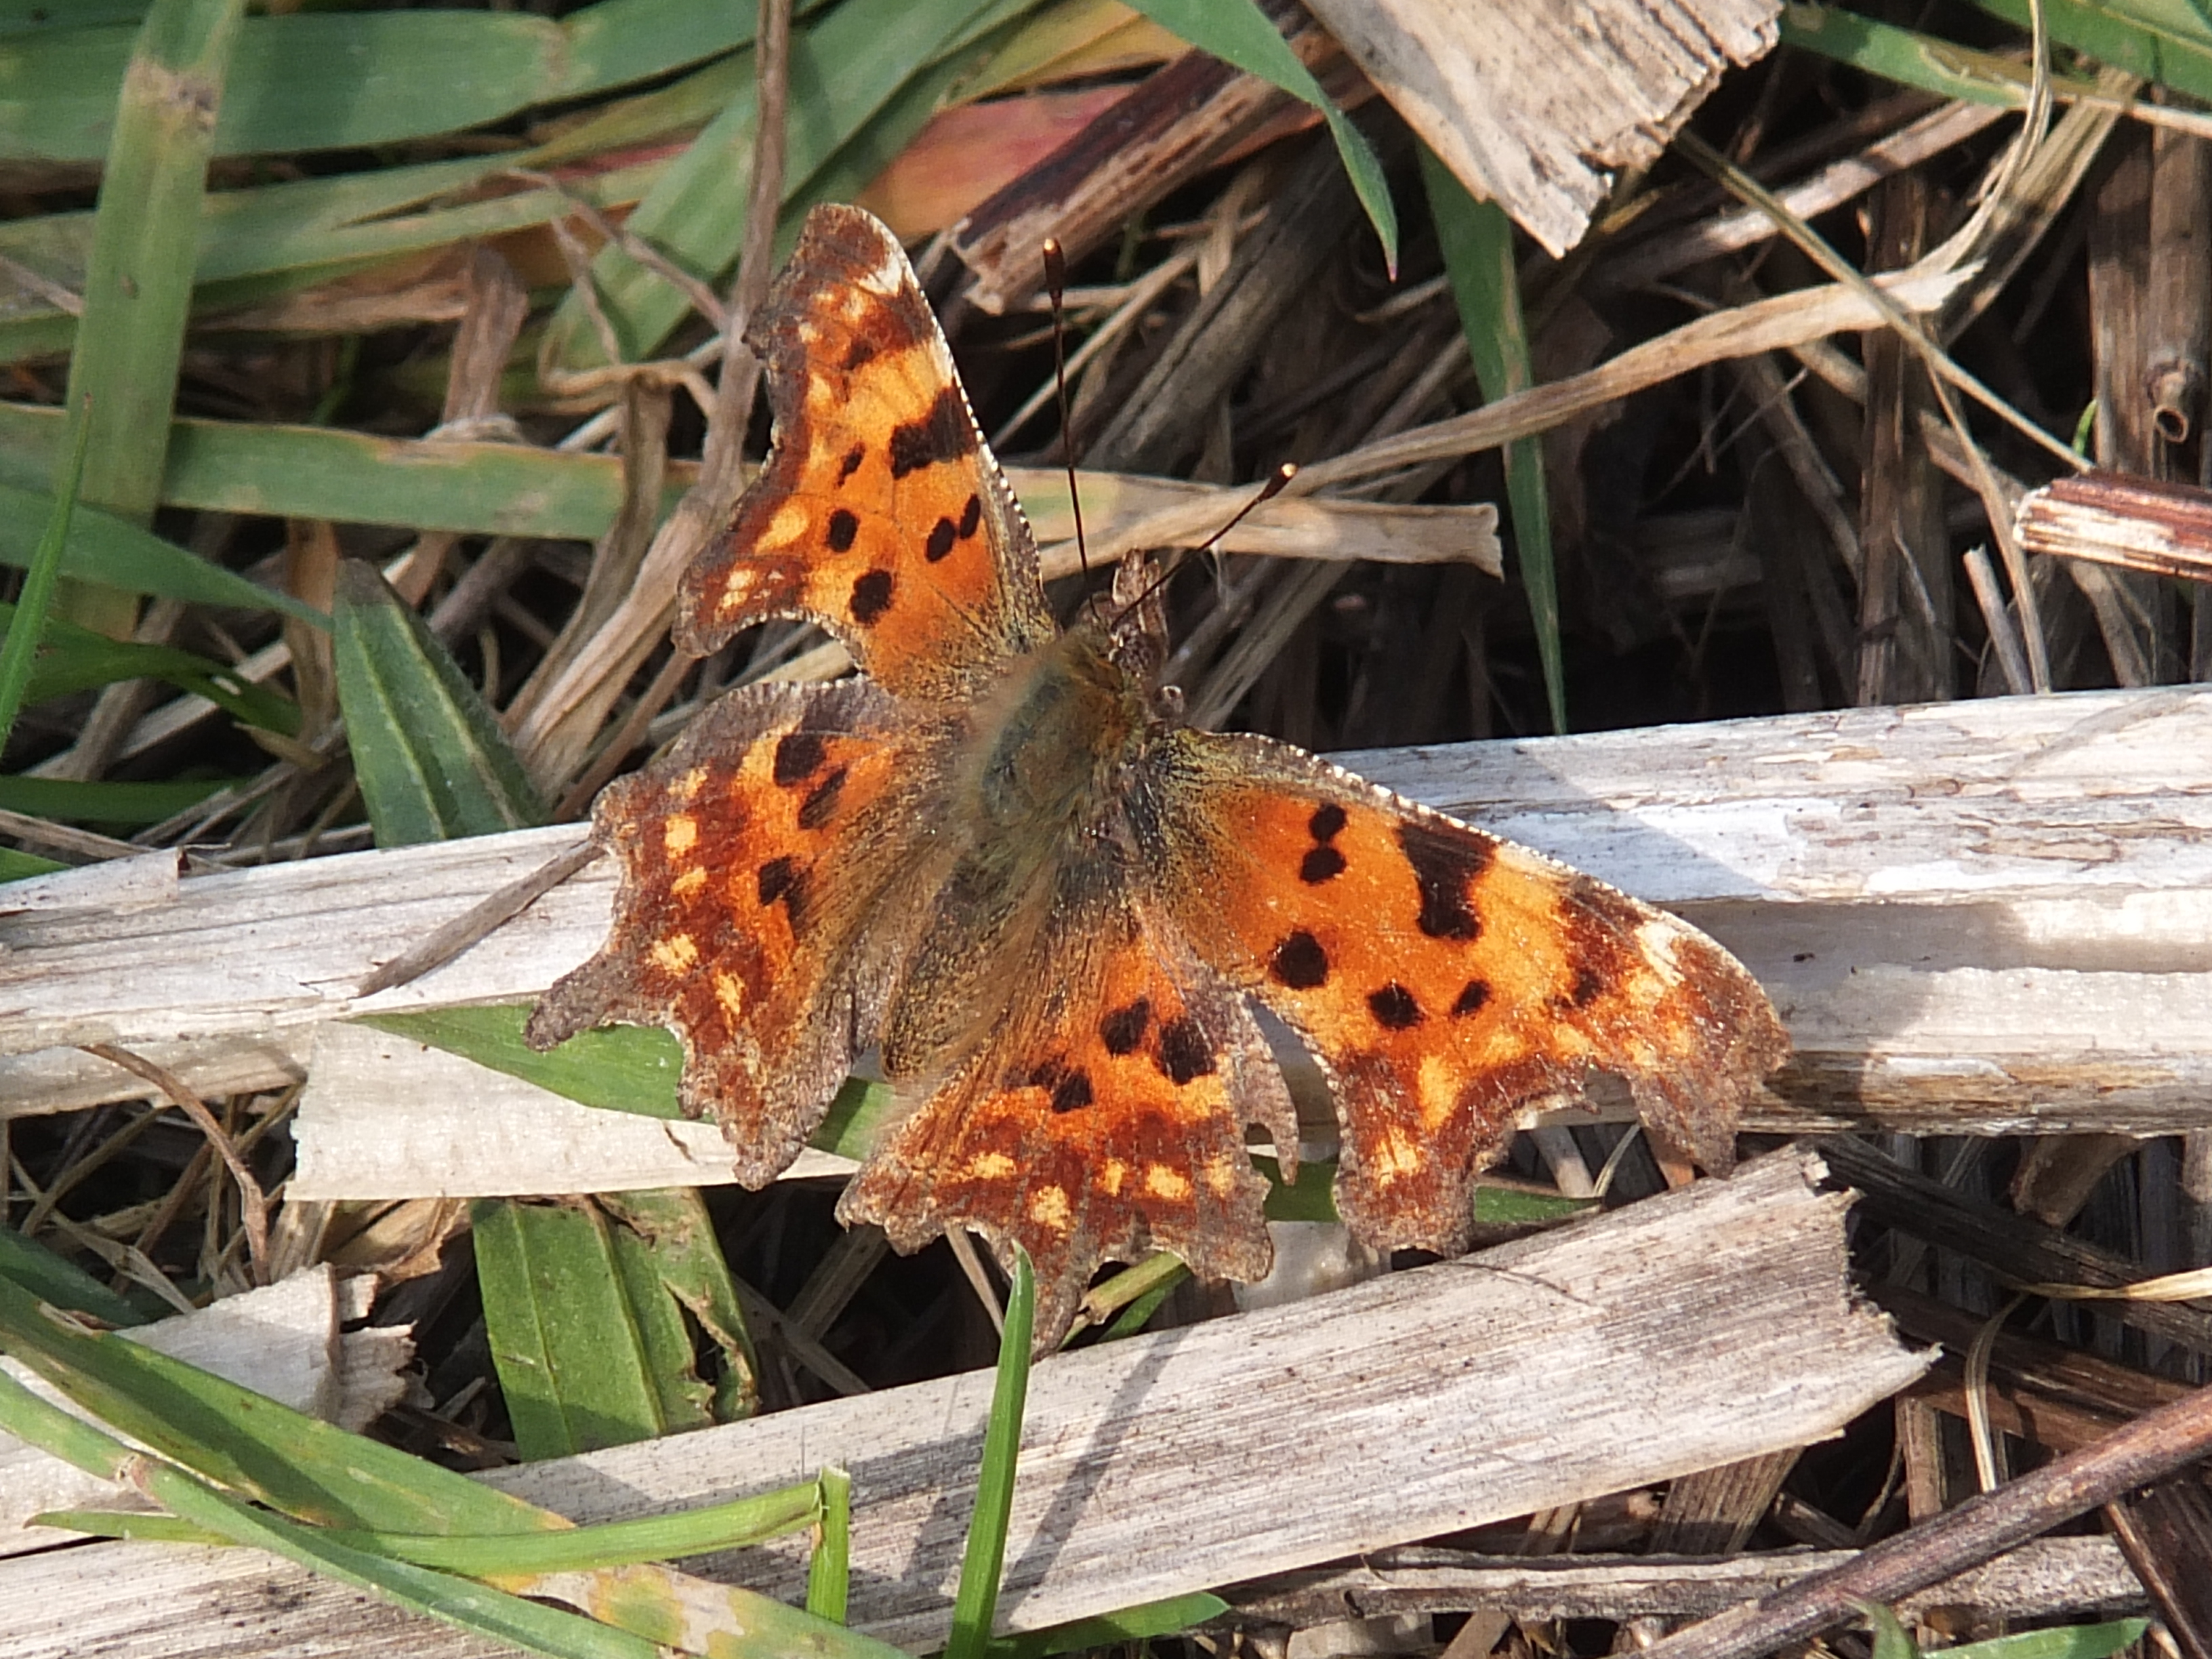 Comma butterfly (Polygonia c-album) with its distinctive ragged wings 